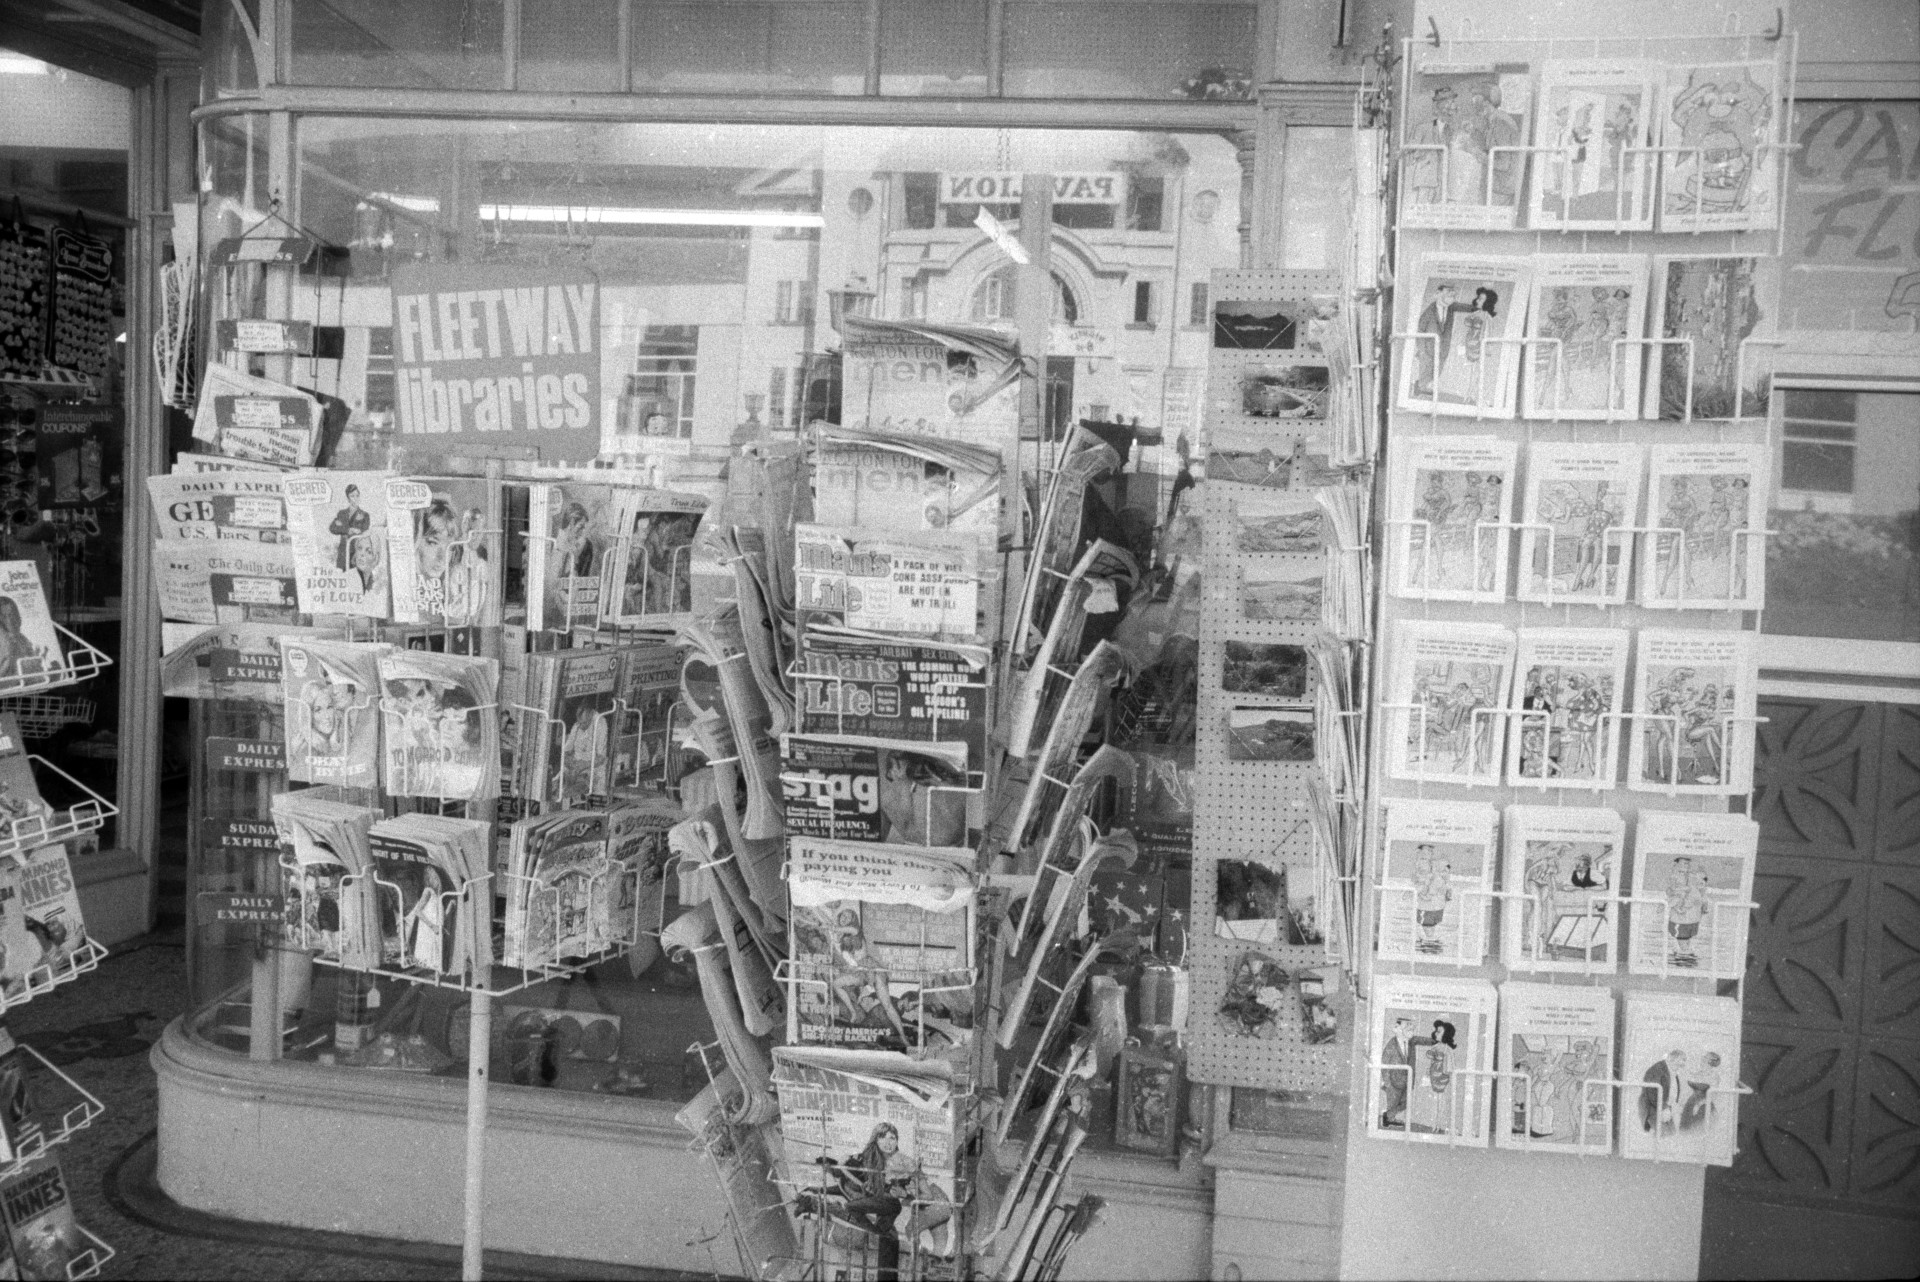 Postcards, newspapers and magazine on display in stands outside a shop in Ilfracombe.